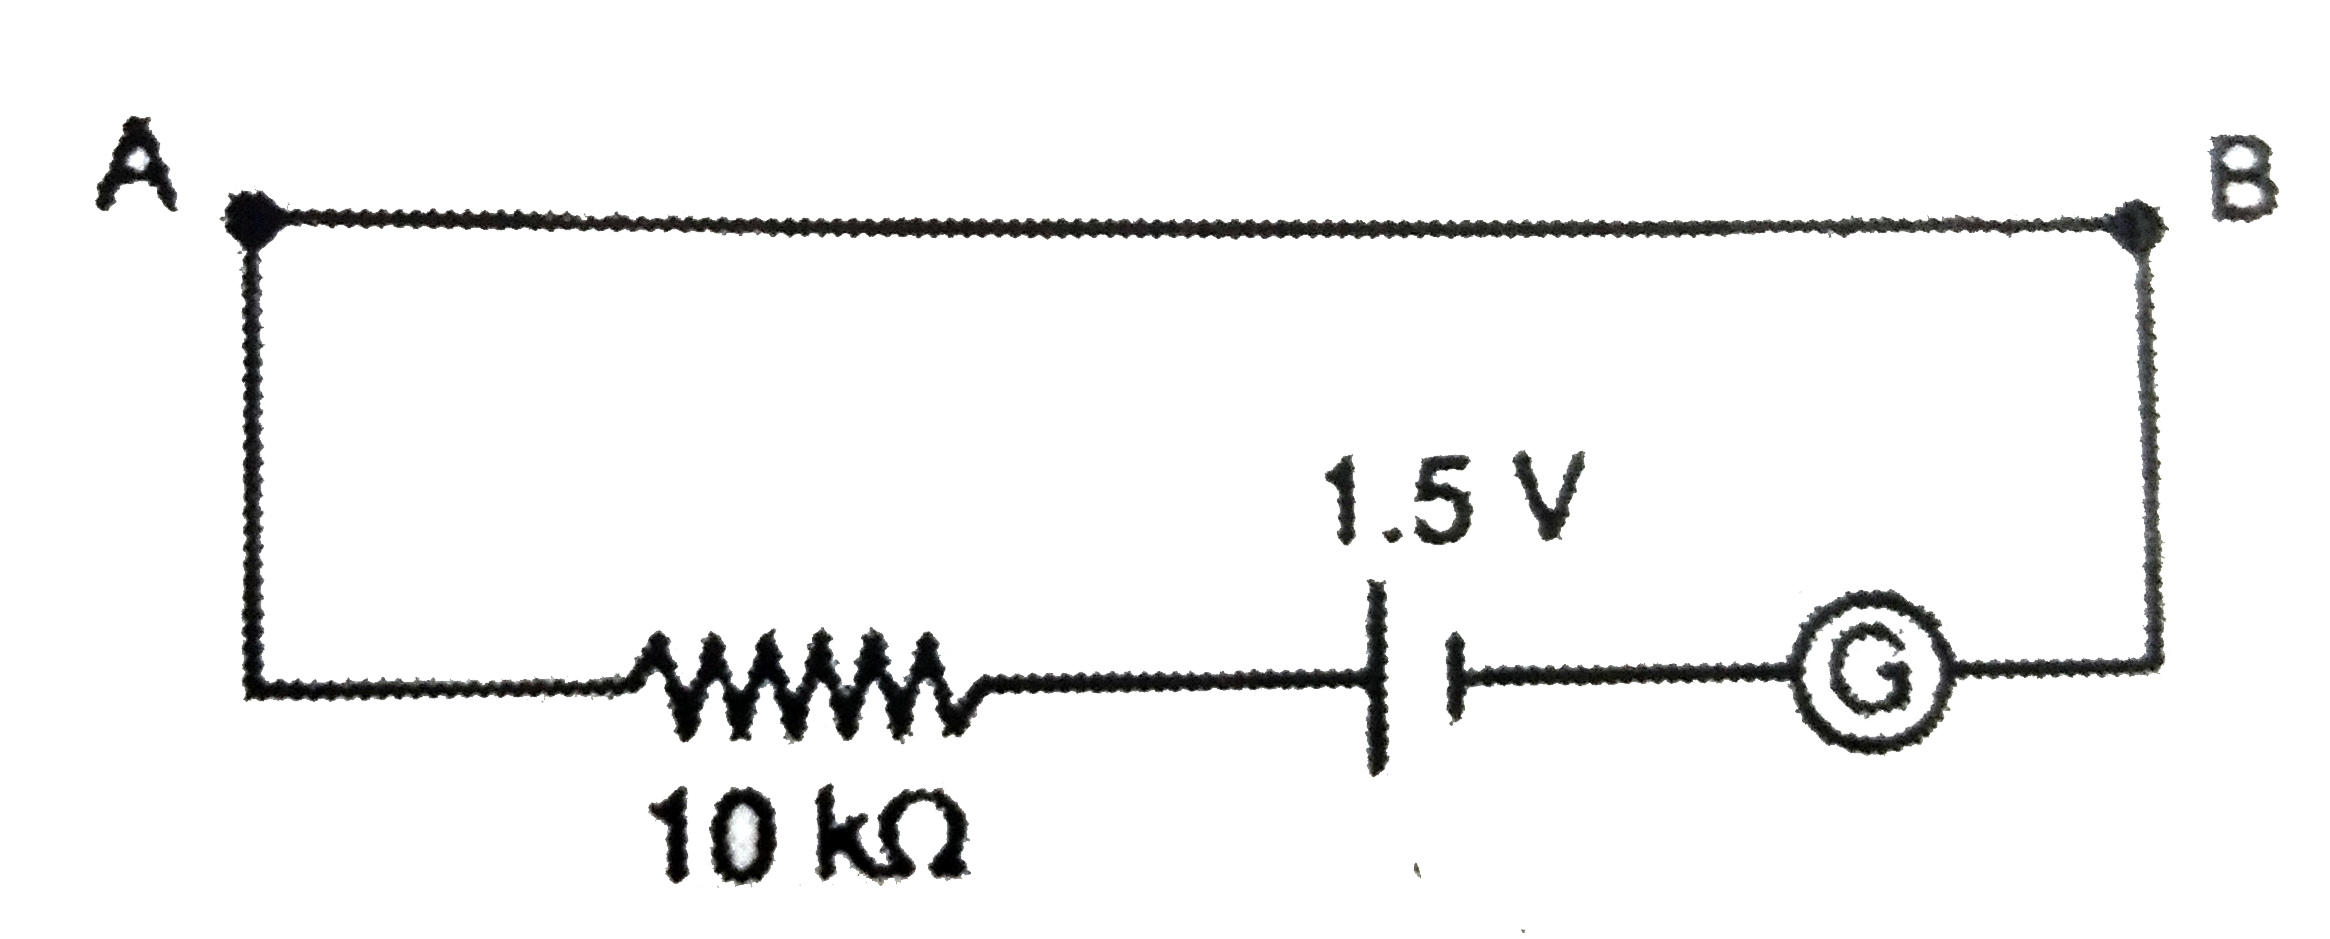 A nichrome wire AB, 100 cm long and of uniform cross section cross section is mounted on a meter scale the points  A and B coinciding with 0 cm and 100 cm marks respectively. The wire has a resistance S = 50 ohm, Ay point C along this wire, between A and B is called a variable point to which on end of and electrical element is commeted. In the following questions this arrangement will be referred to as 'wire AB'.   In the circuit adjacent arrangement it is found that deflection in the galvanometer is 10  divisions. Also the voltage across the 'wire AB' is equal to the across the galvanometer. the current sensitivity of the galvanometer is about.